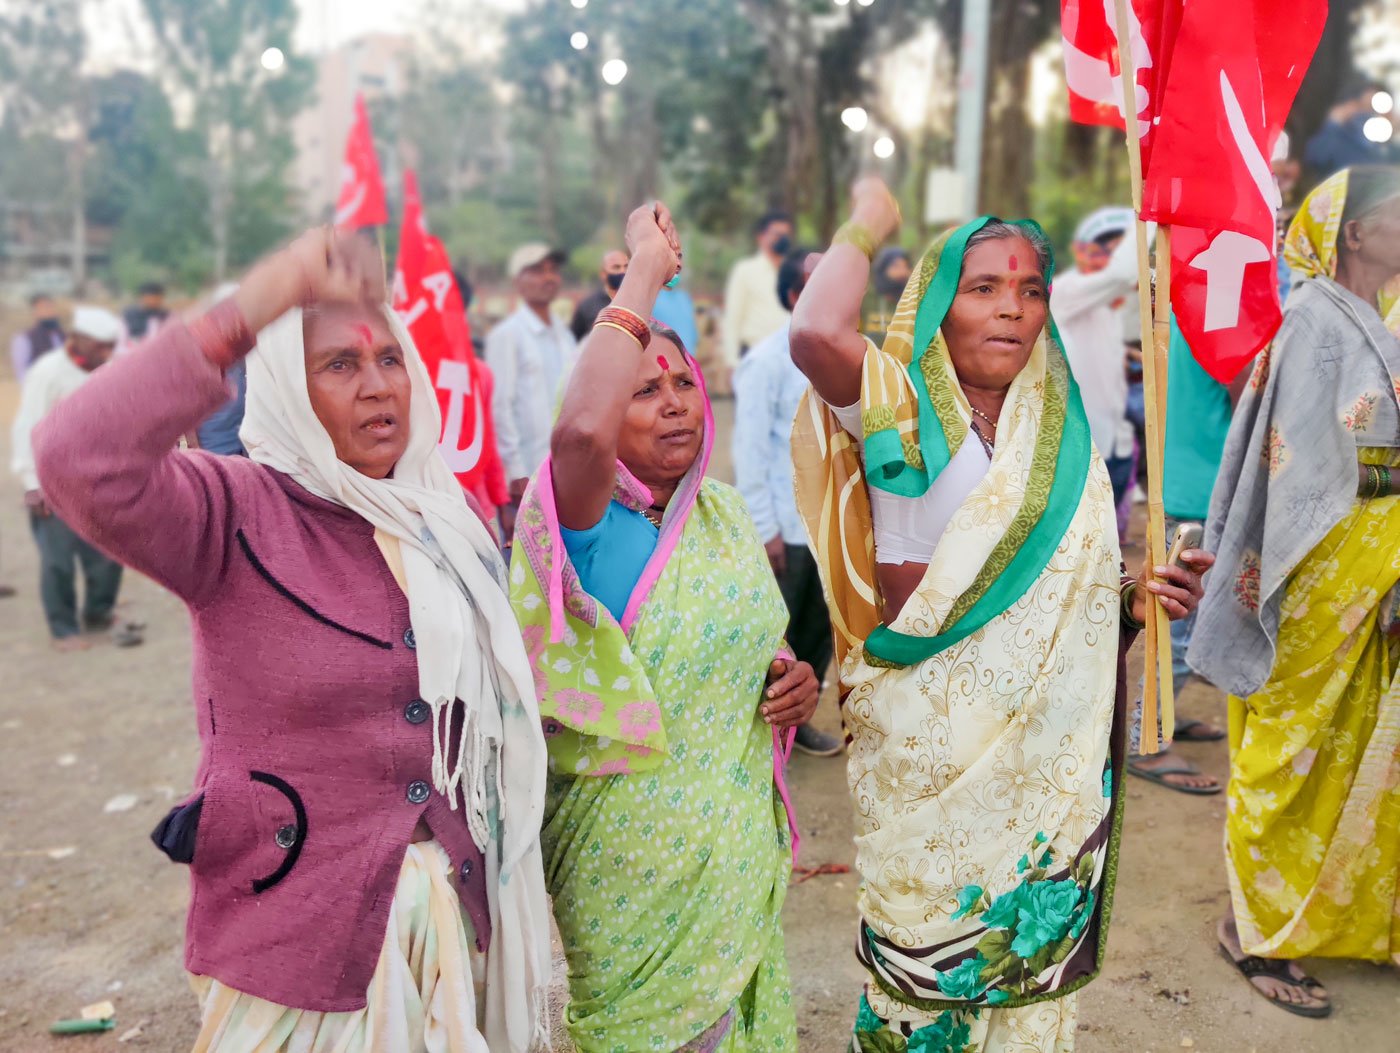 Mangal (right) is more outspoken, Mirabai (middle) is relatively shy, but both women farmers know exactly why they and the other farmers are protesting, and what the fallouts of the farm laws could be